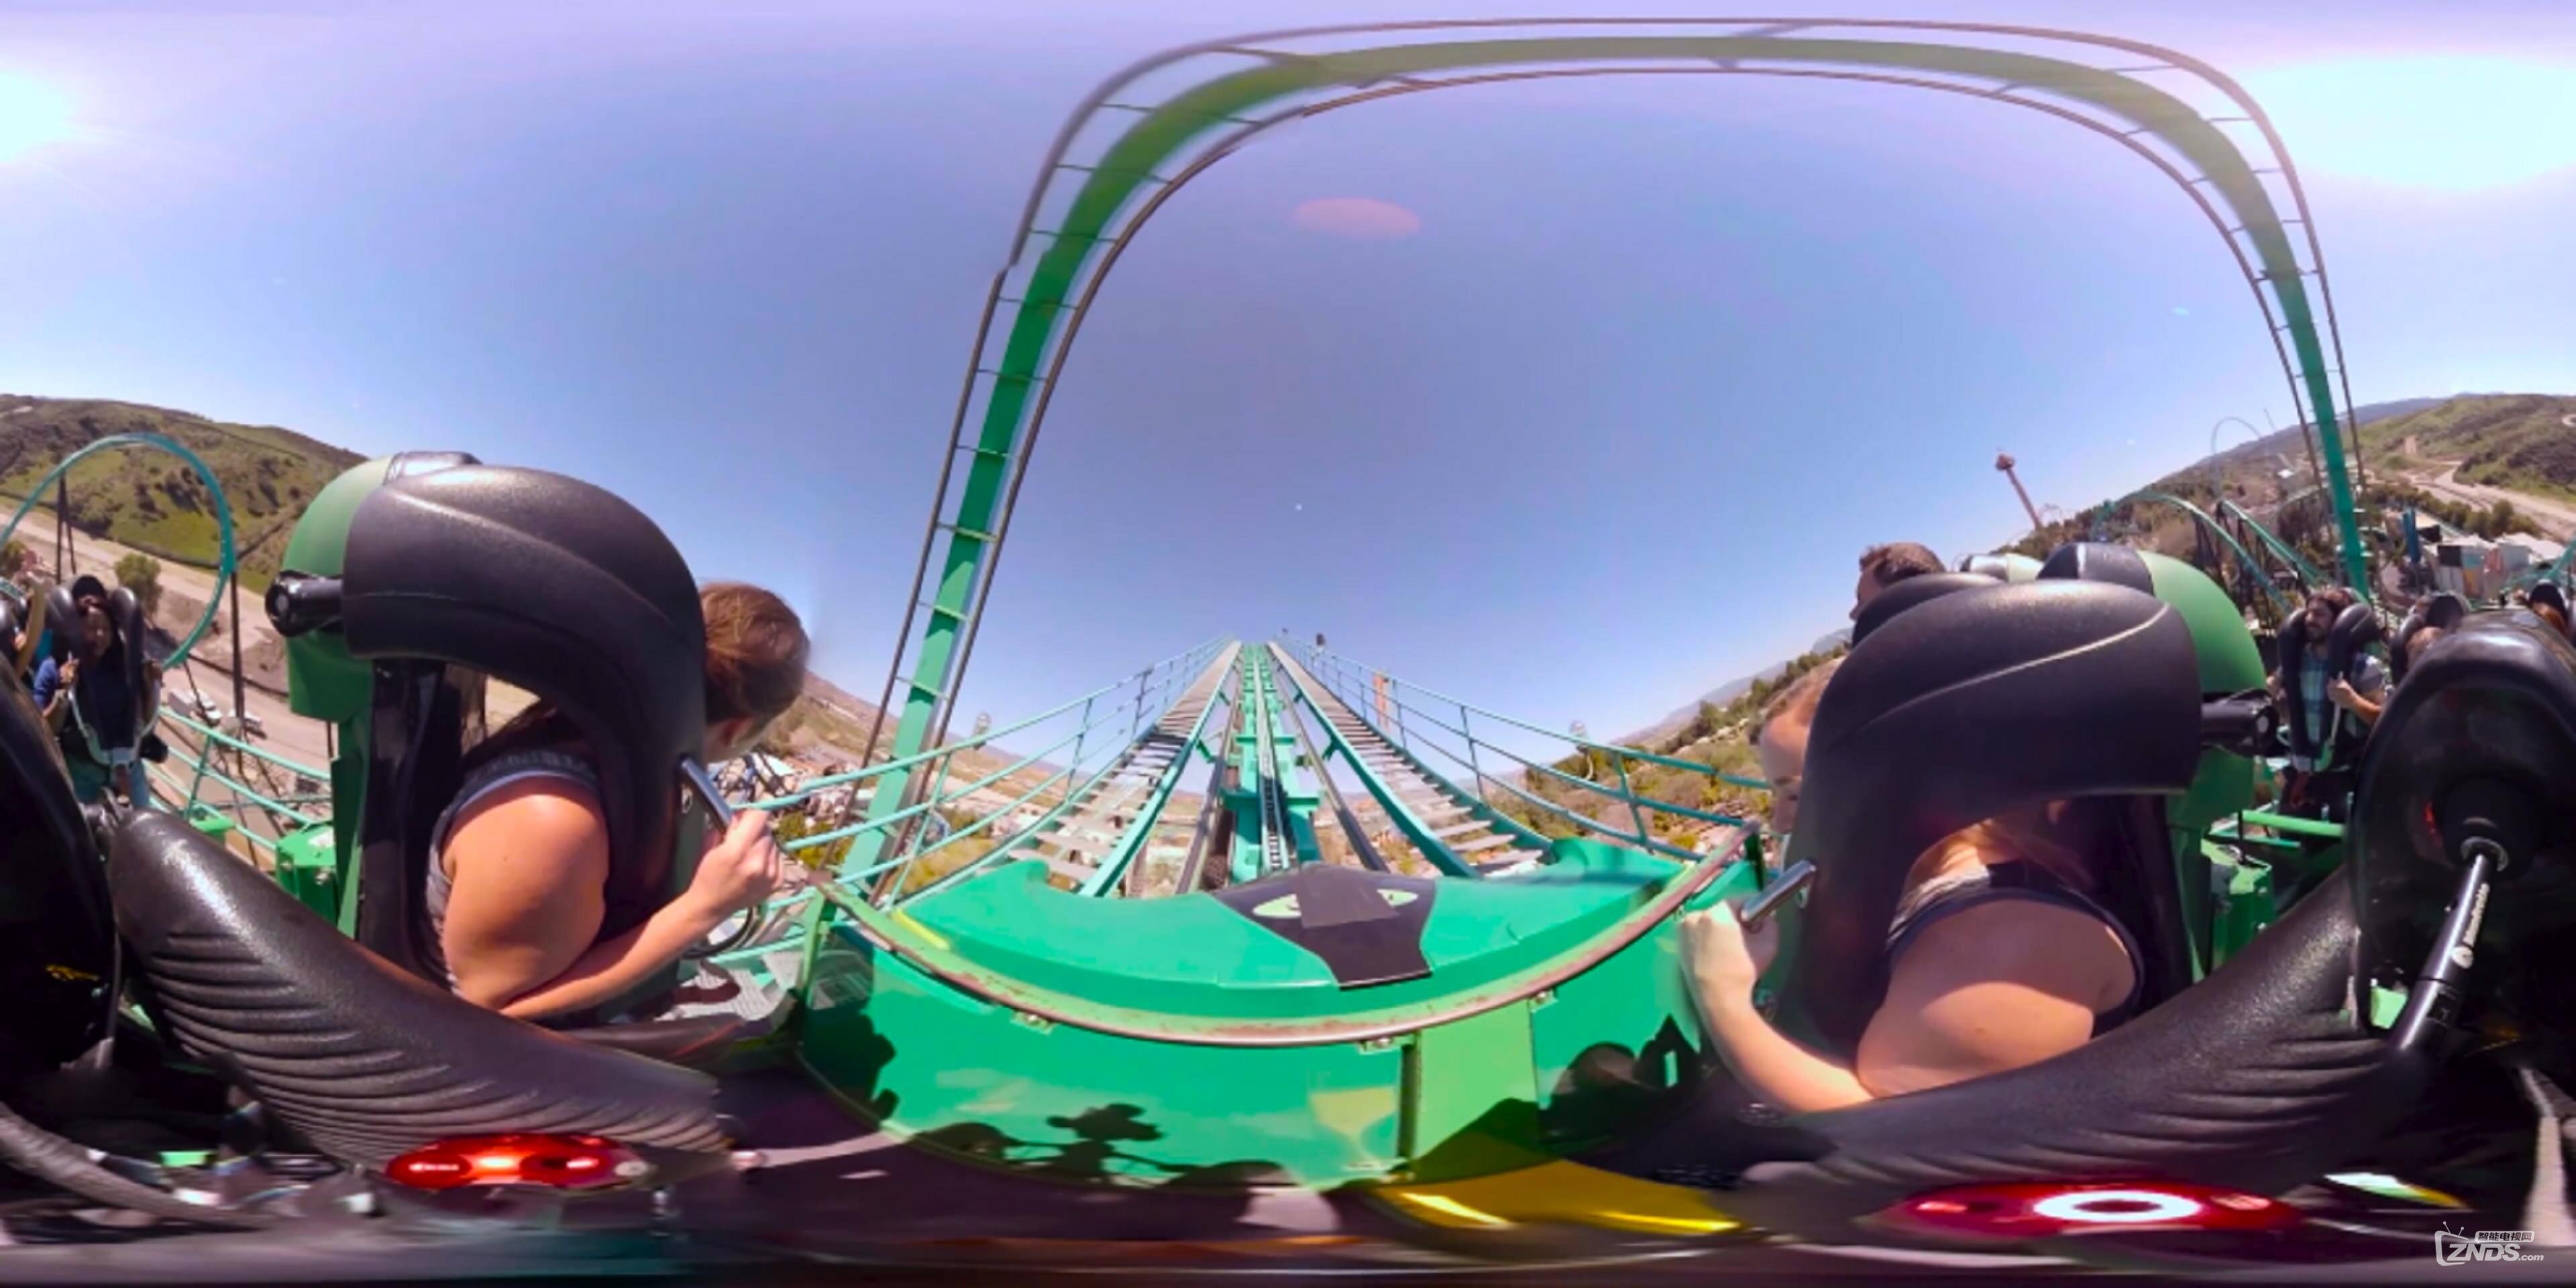 Youtube-[video]Mega Coaster_ Get Ready for the Drop (360 Video)_(1)_20160720210610.JPG